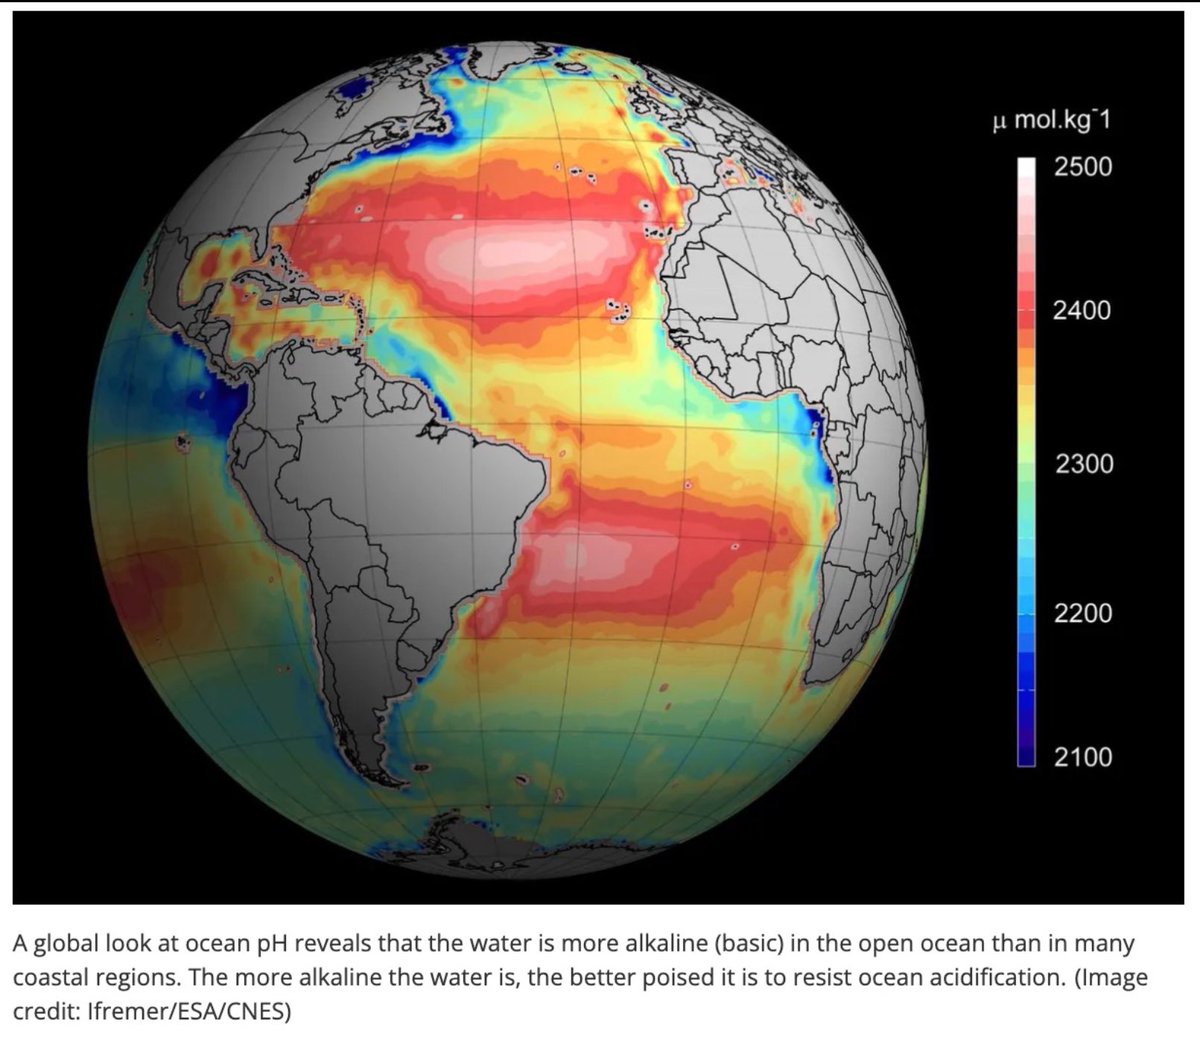 It is very obvious that ocean acidification is only a coastal effect and has nothing to do with atmospheric CO2. Se the dark blue areas. It is likely due to river and coastal land and industrial/agriculture runoff. The open oceans are not affected.